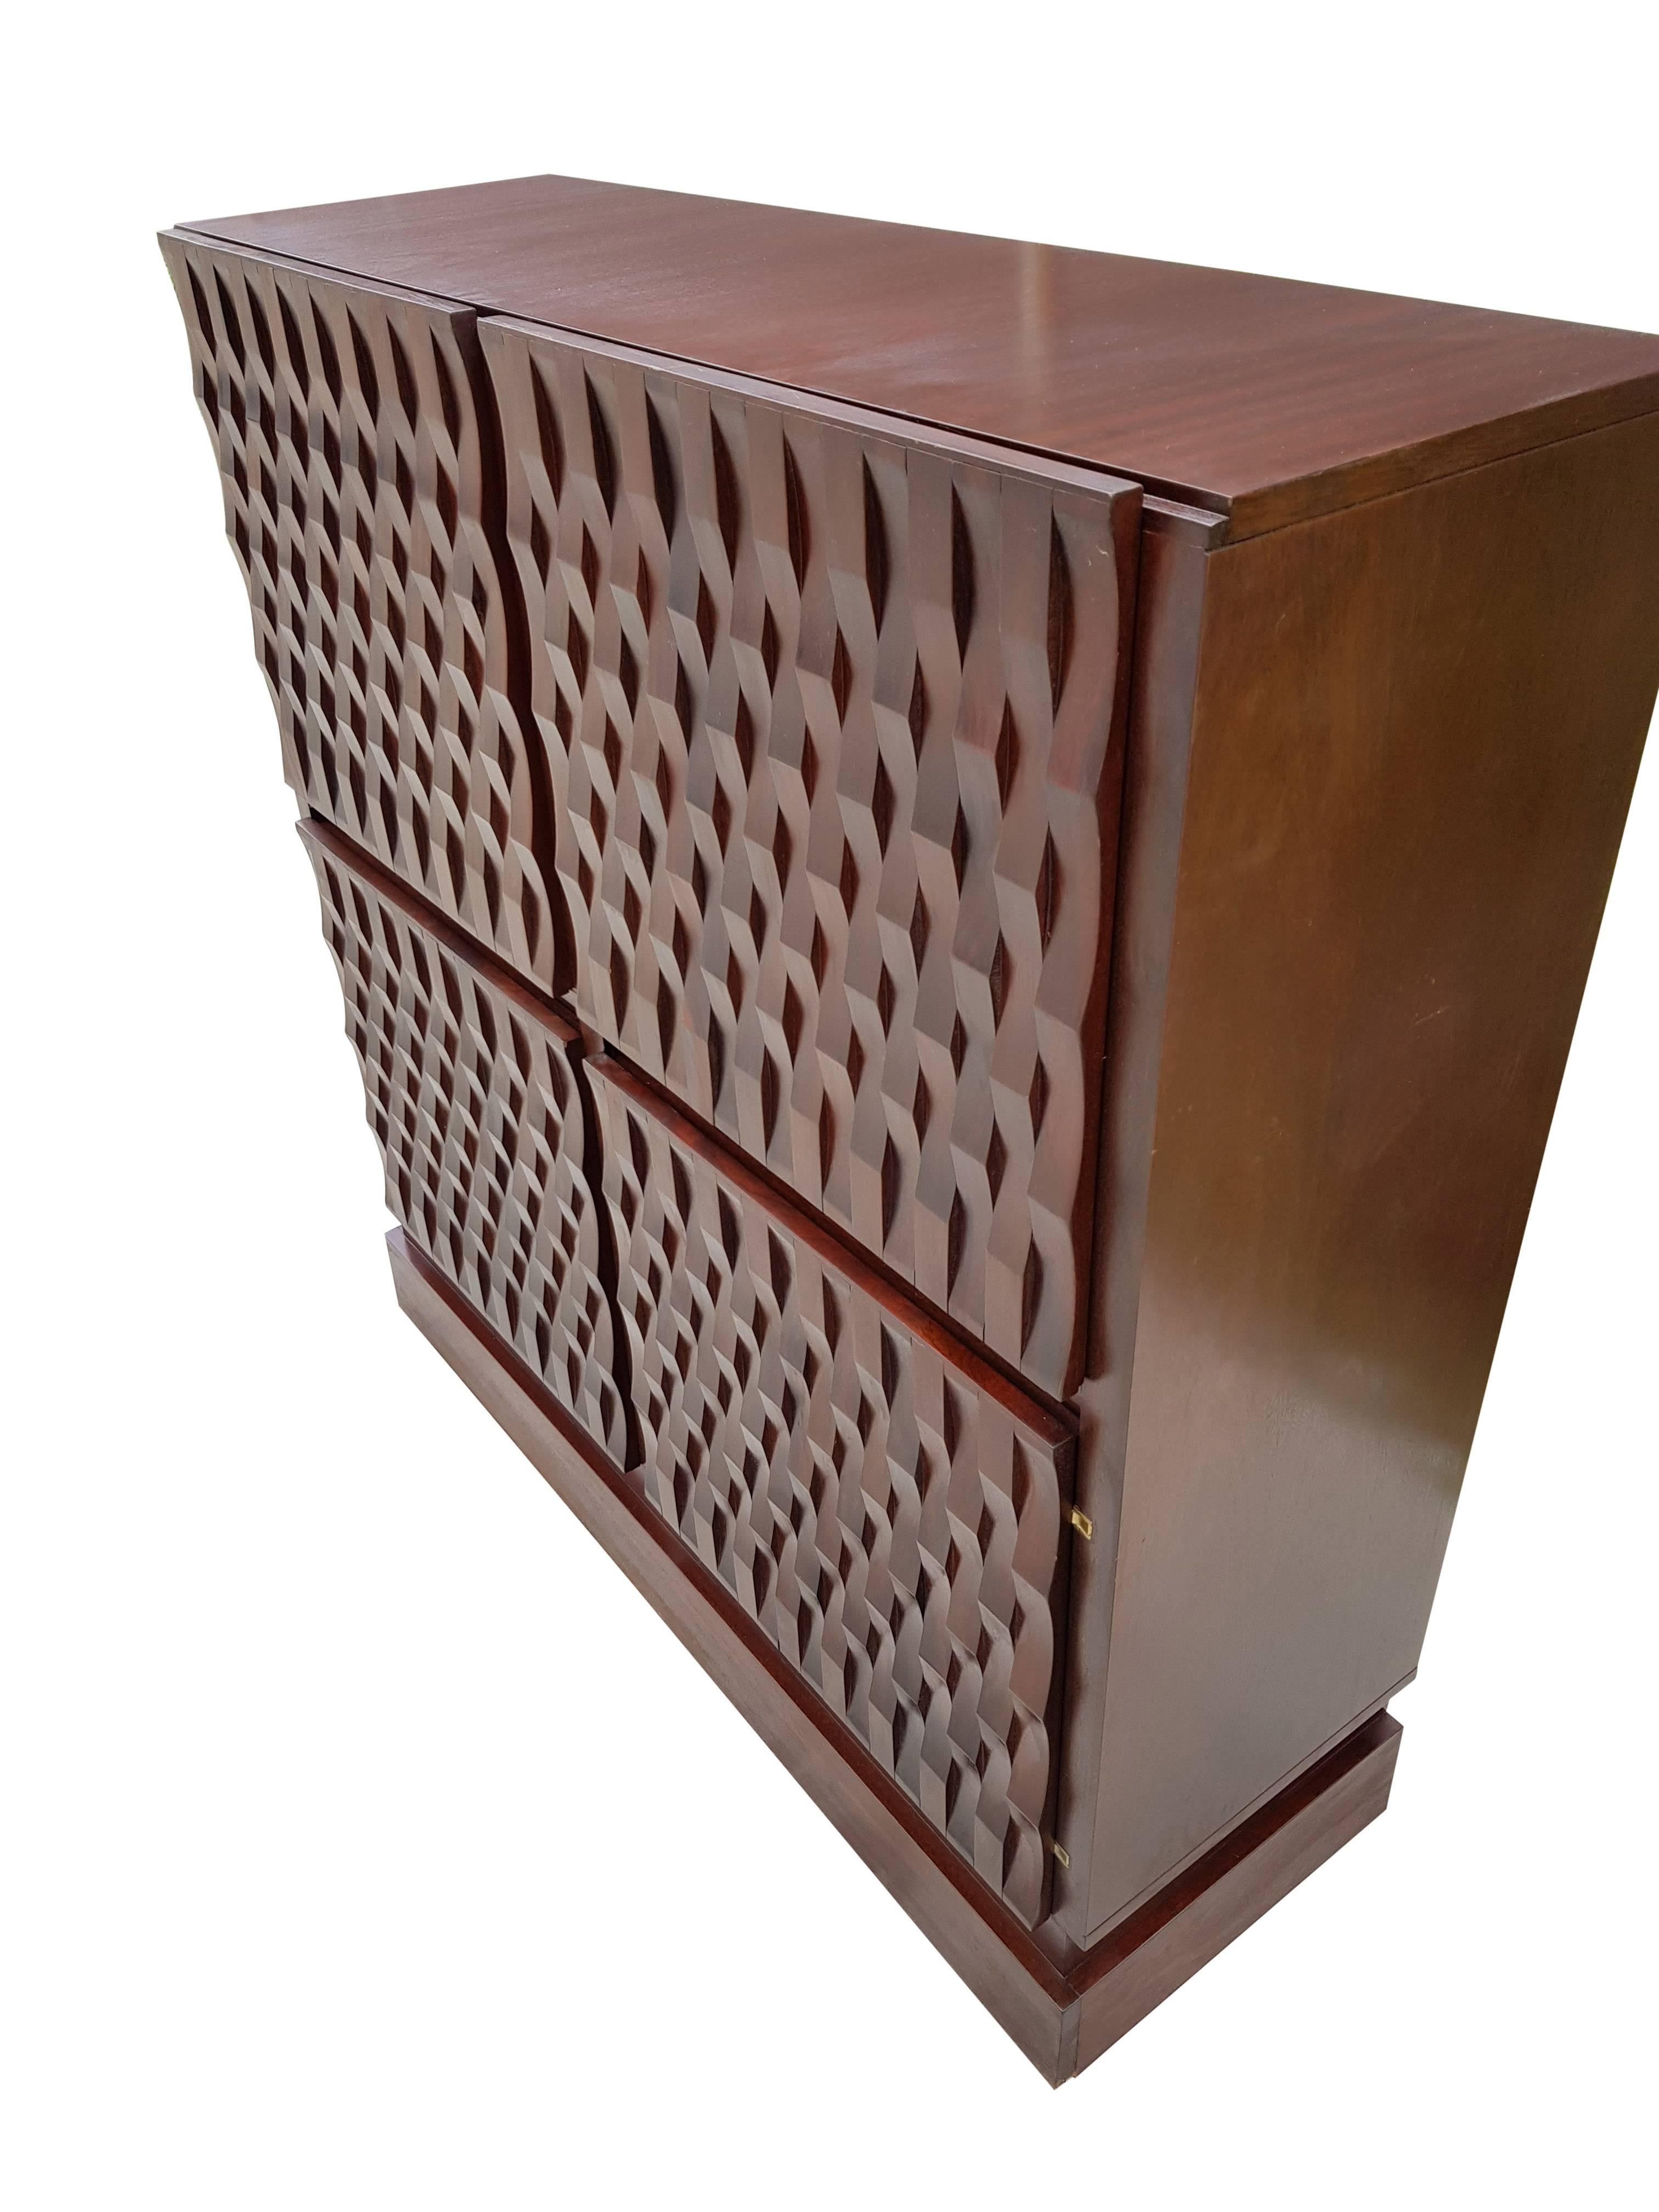 Carved Brutalist Bar in Mahogany Wood Cabinet by Musterring